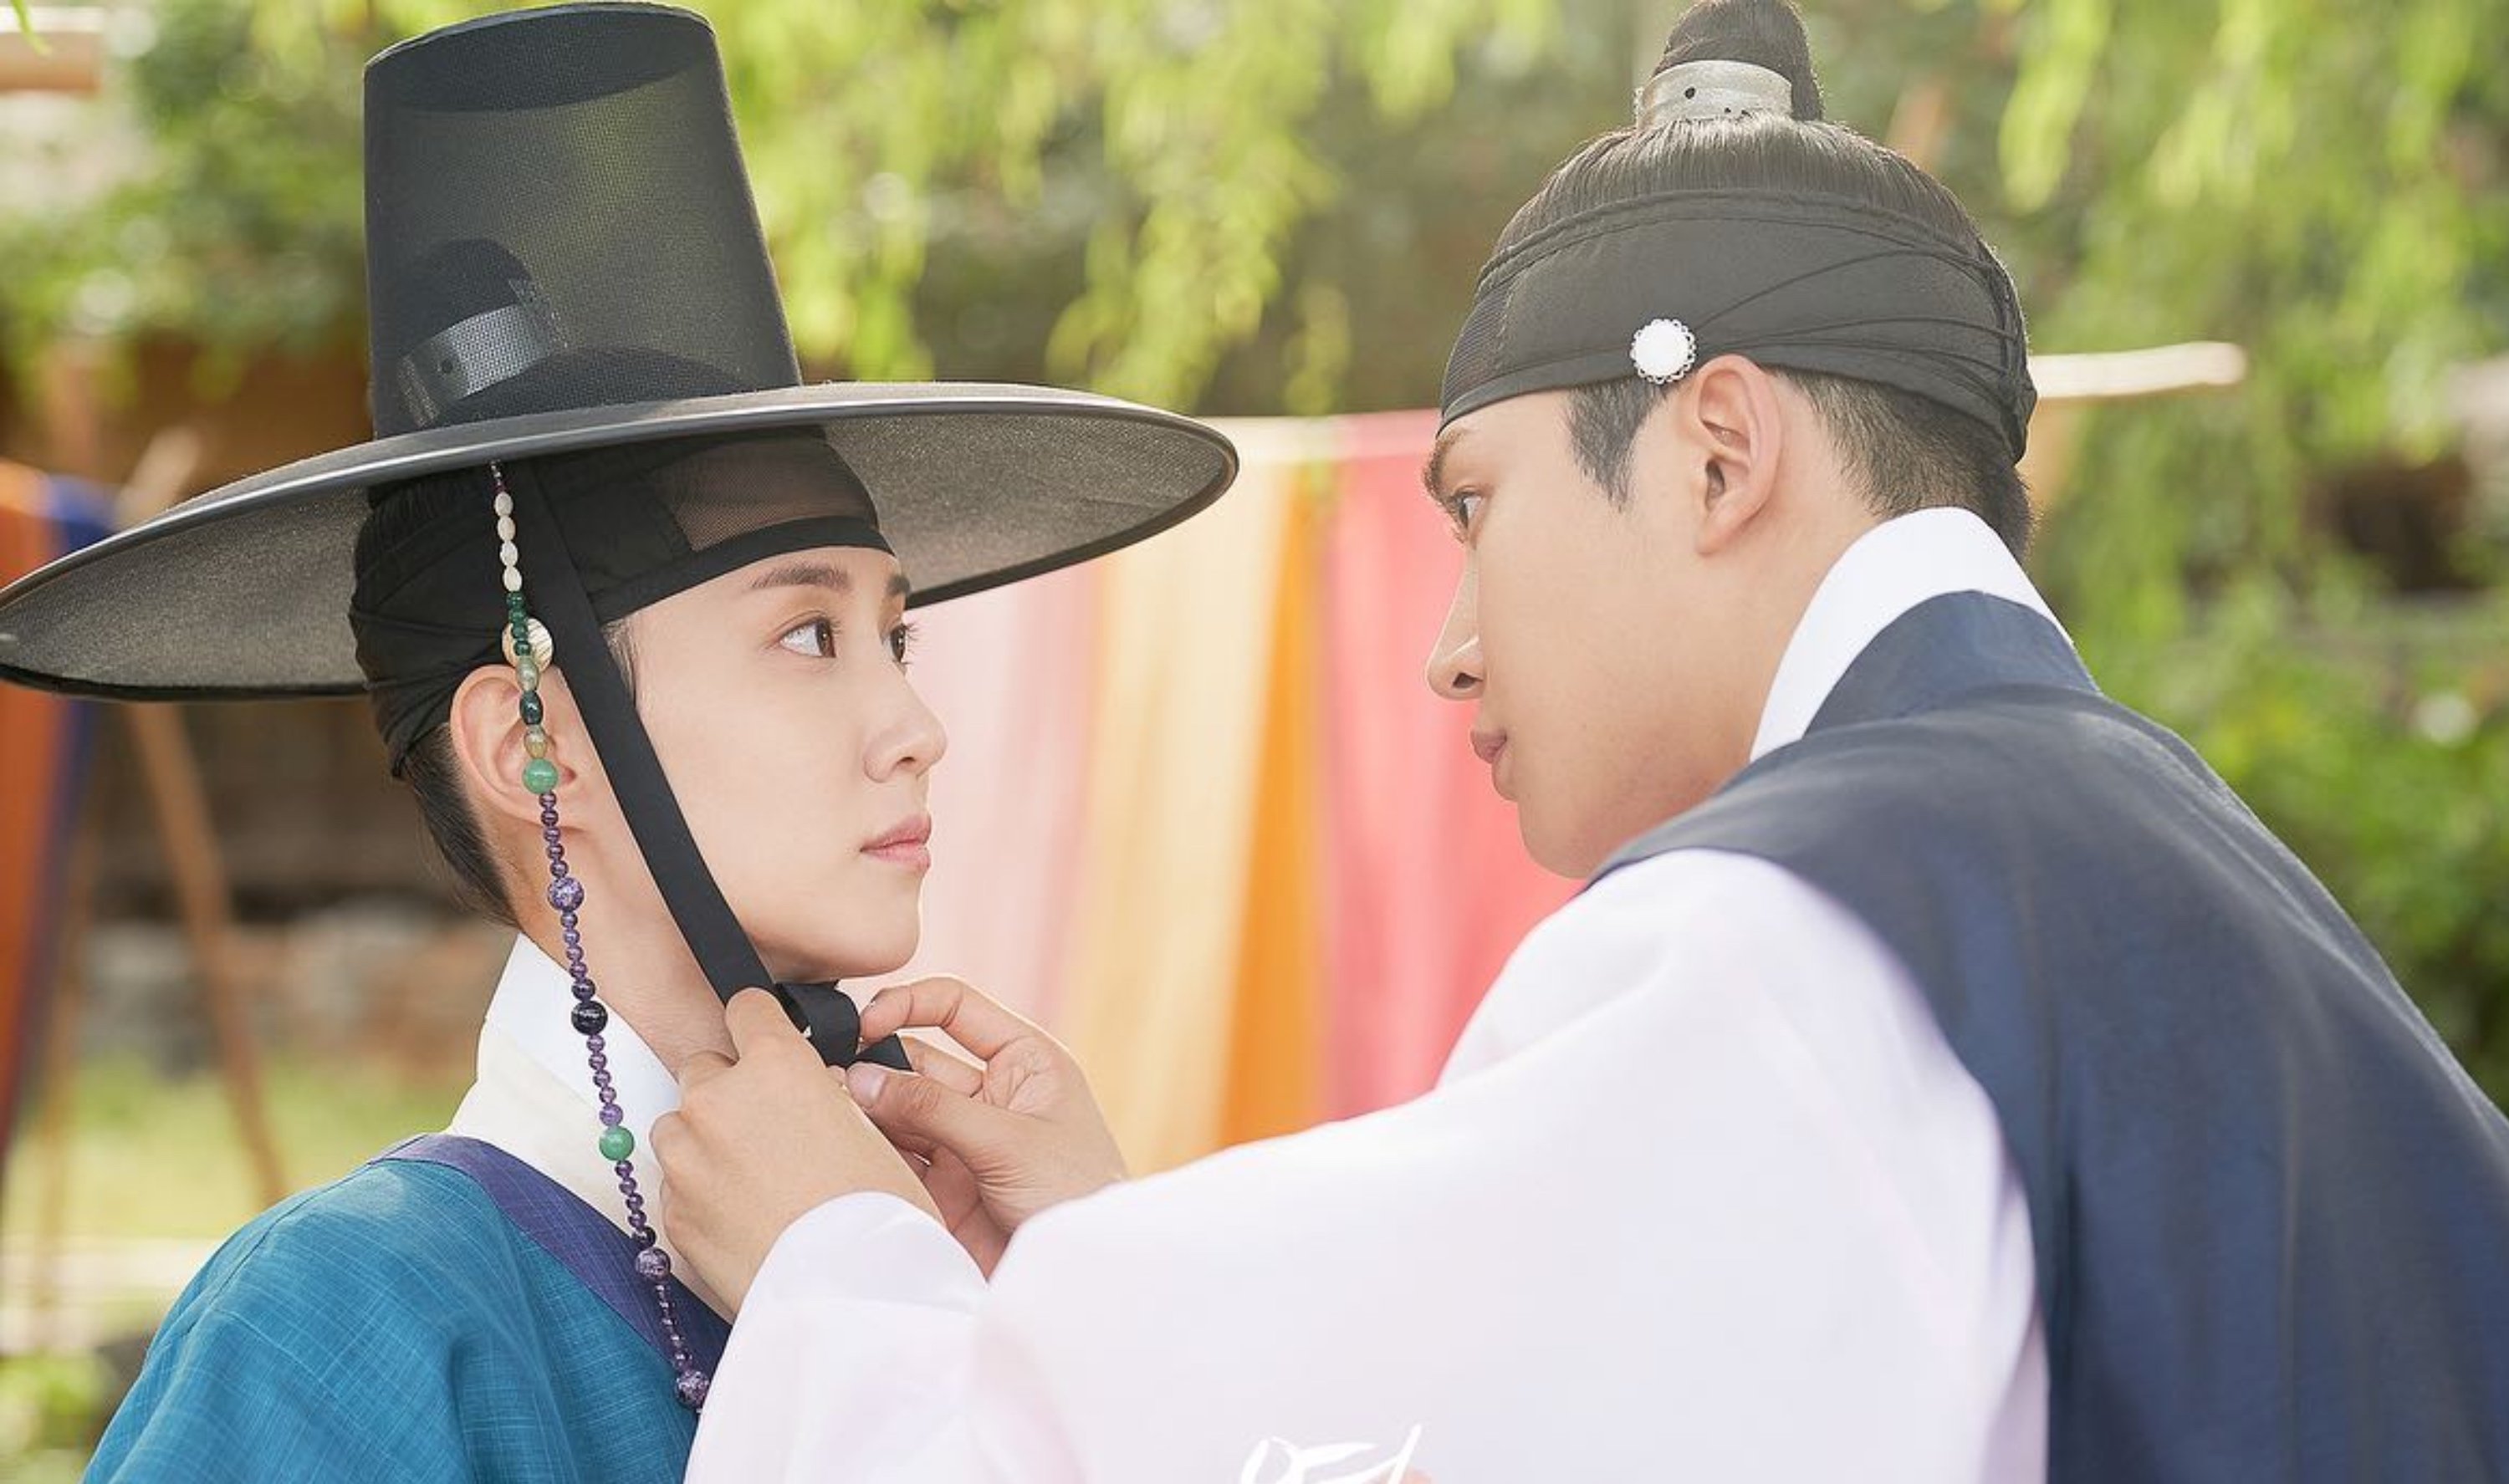 Characters Dam-i / Lee Hwi and Ji-woon for 'The King's Affection' K-drama wearing Joseon era hats and clothing